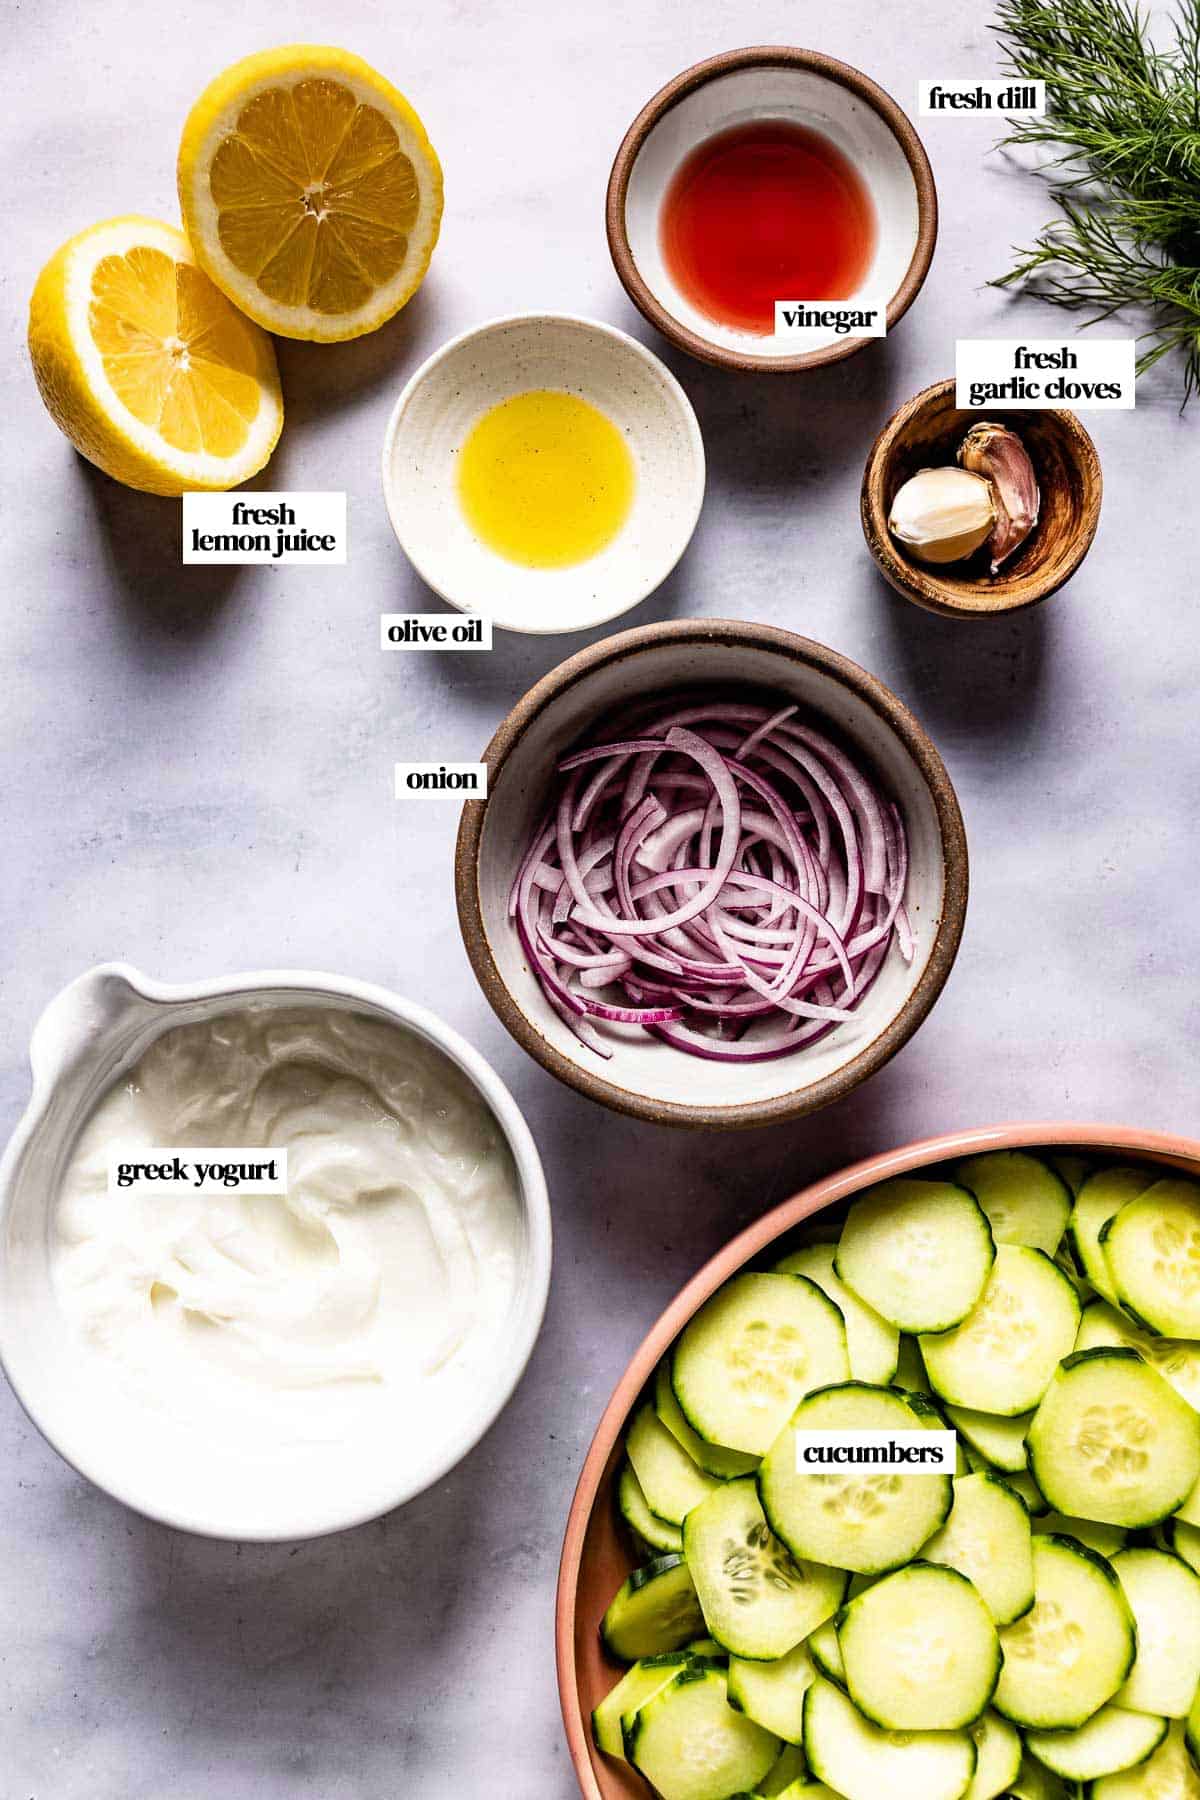 Ingredients for cucumber yogurt salad recipe from the top view.